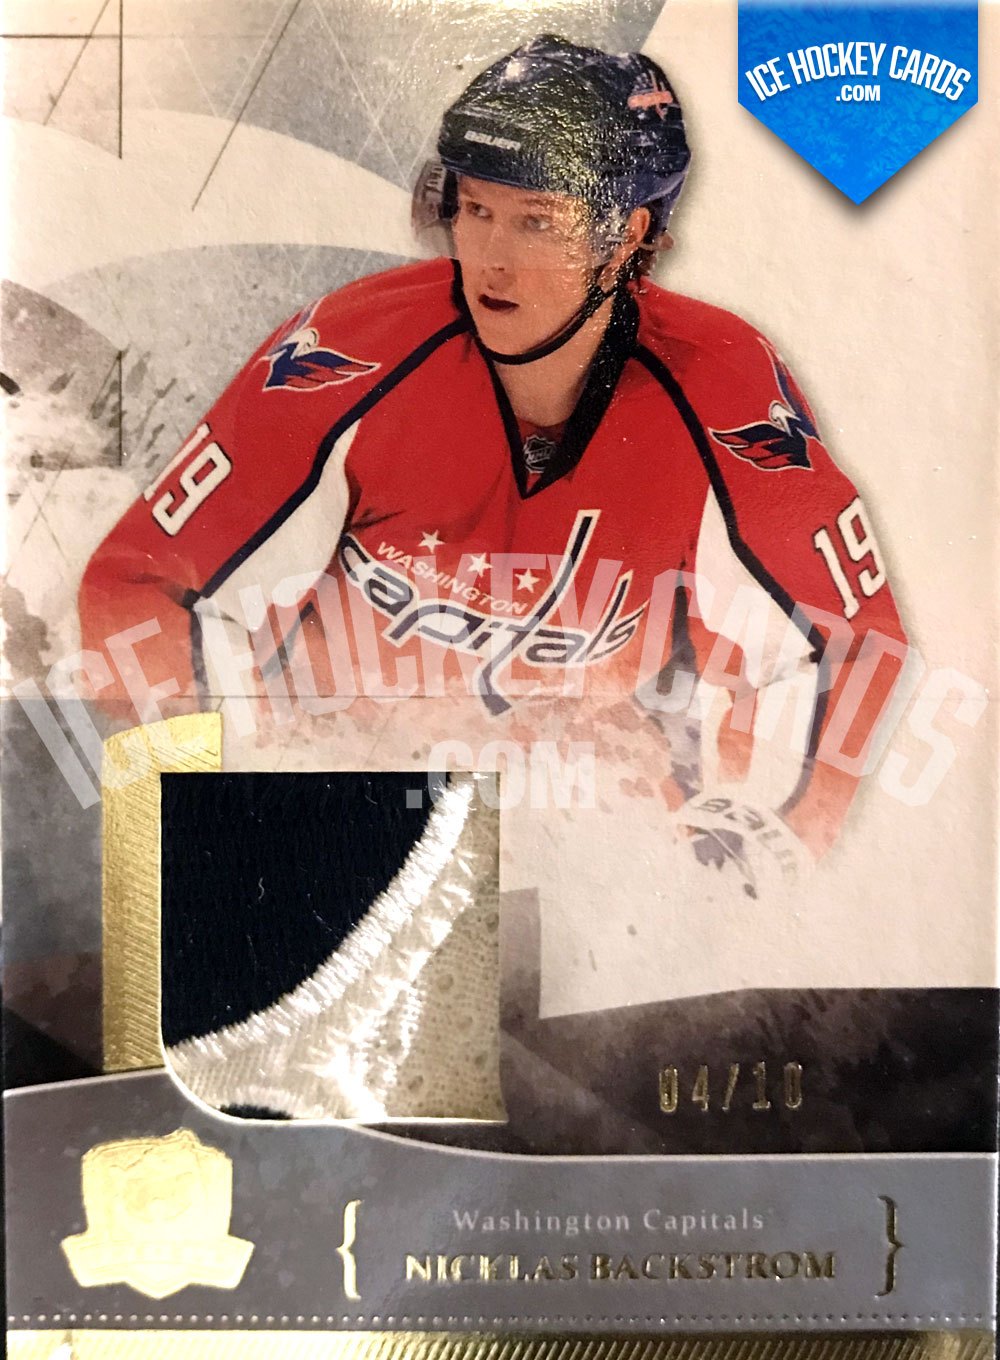 Upper Deck - The Cup 10-11 - Nicklas Backstrom Jersey 4 of 10 RARE